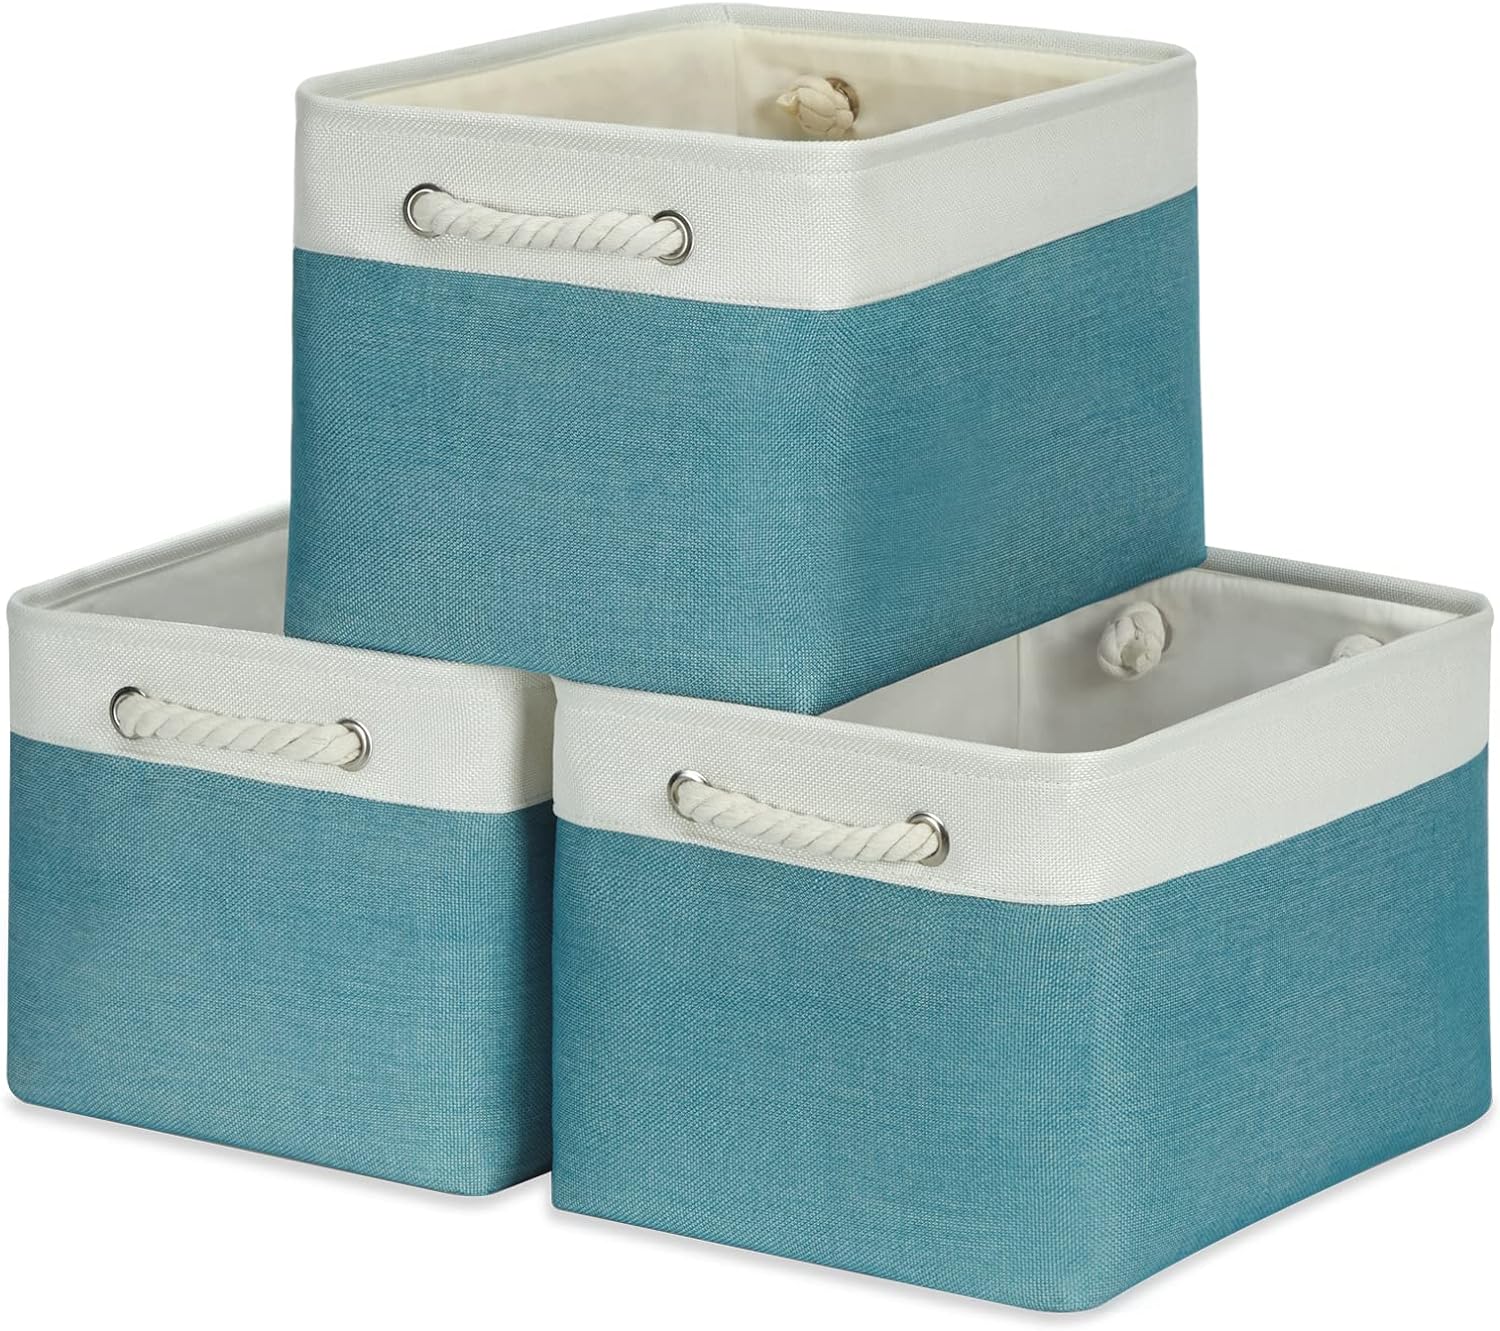 Temary Fabric Baskets Storage Baskets for Organizing 3 Pcs Collapsible Storage Bins Decorative Baskets for Gifts Empty, Home, Office (White&Teal,15Lx11Wx9.5H Inches)